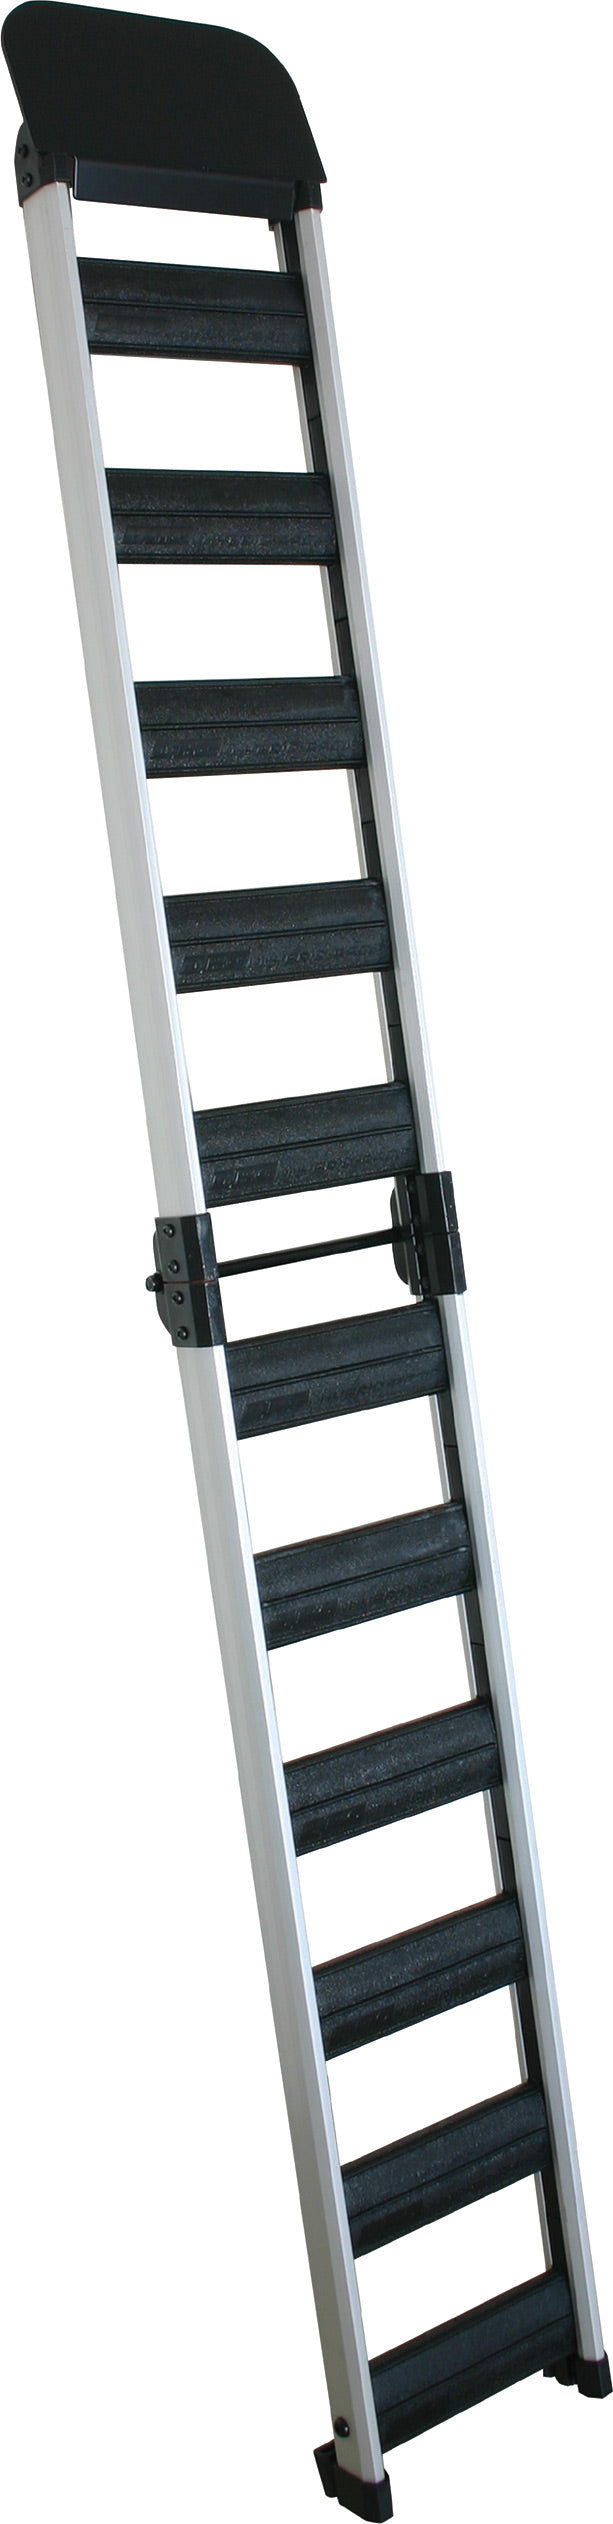 Folding load ramp 1.8 metres supporting up to 190kg, extended and ready for use